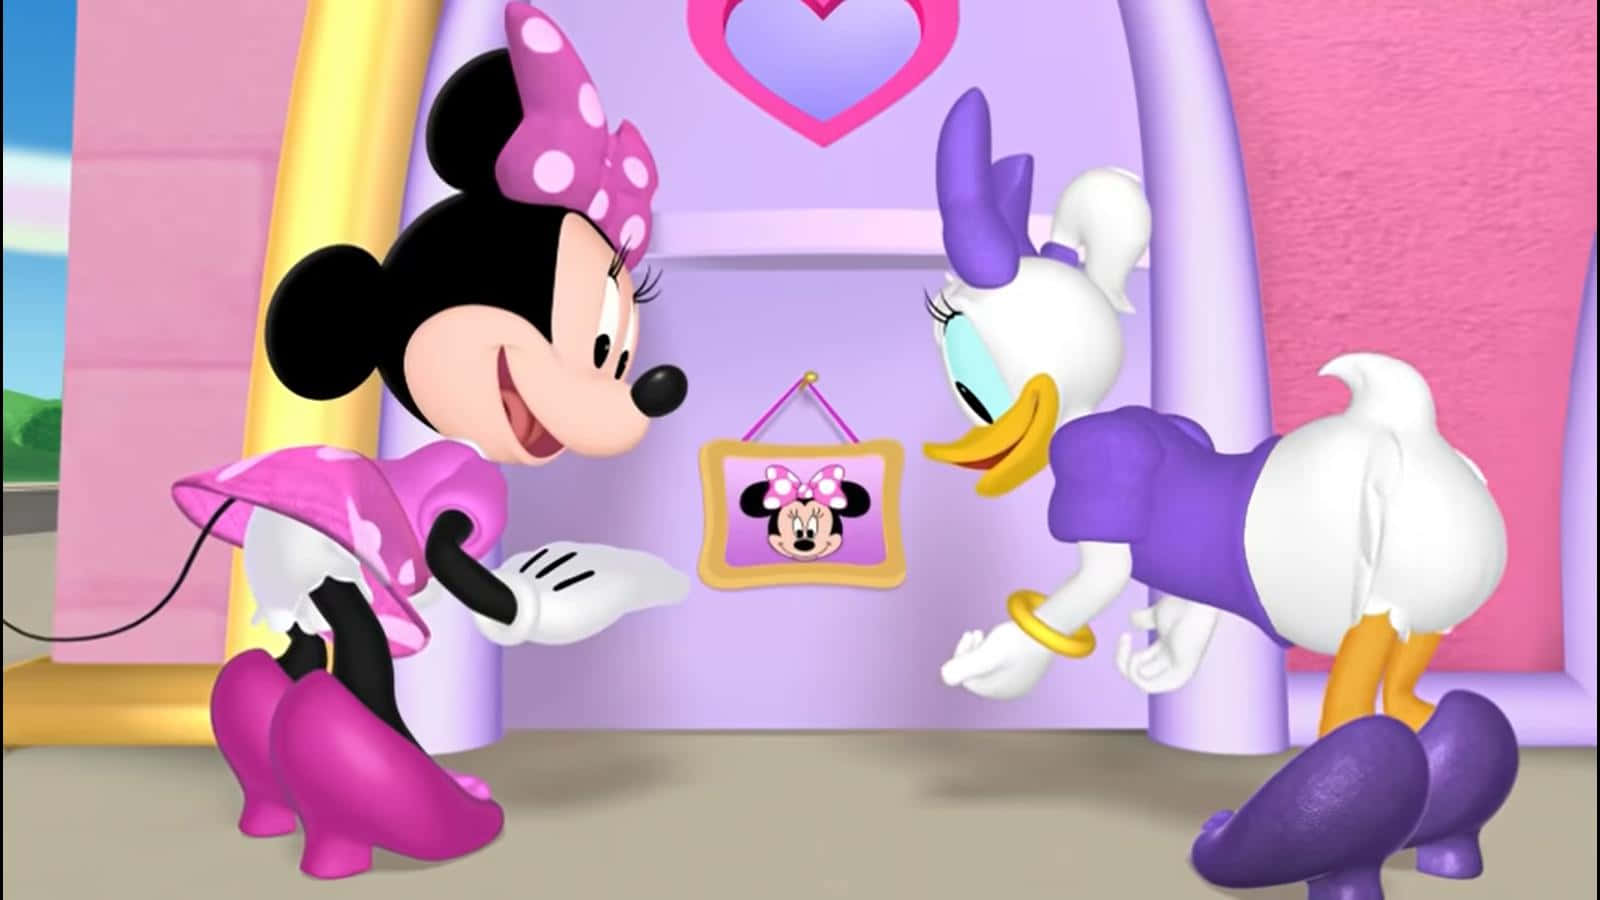 Minnie Mouse And Donald Duck In A Pink And Purple House Wallpaper